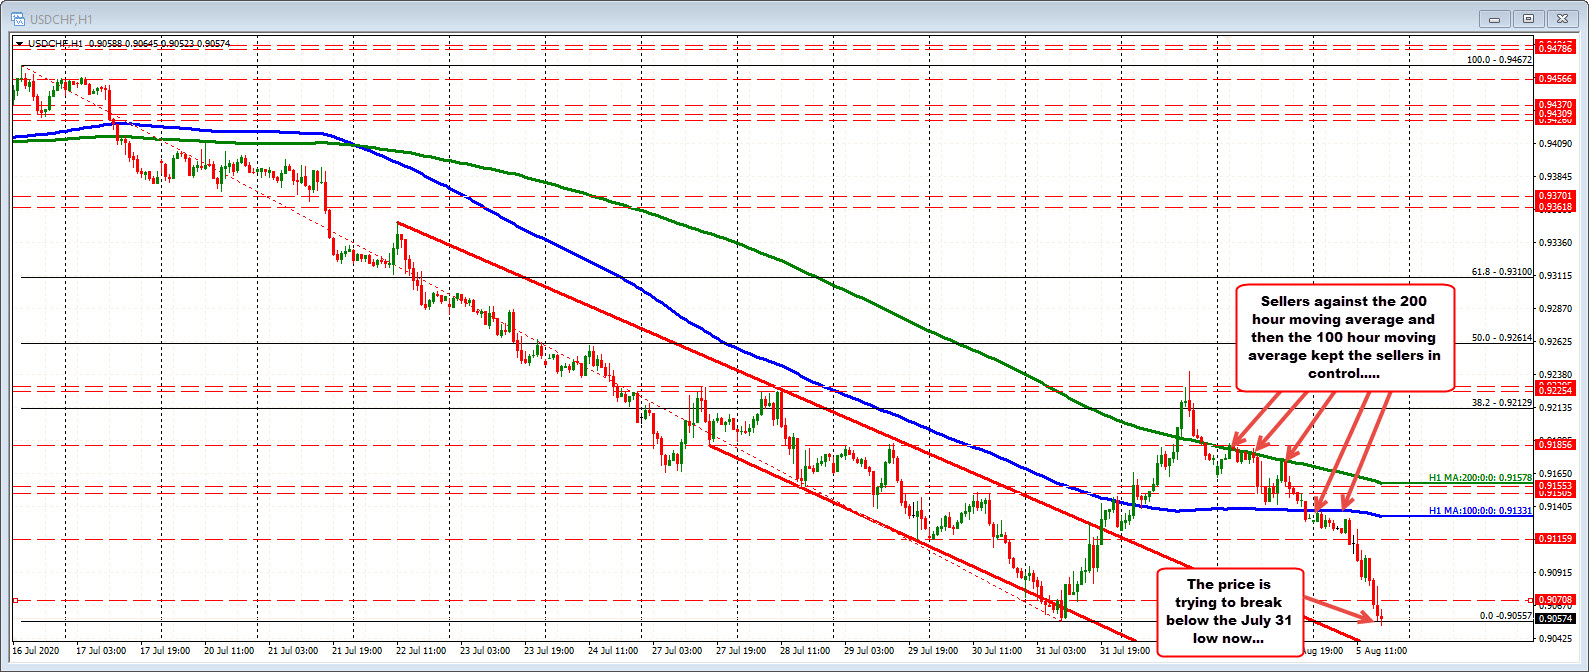 USDCHF on the hourly chart 